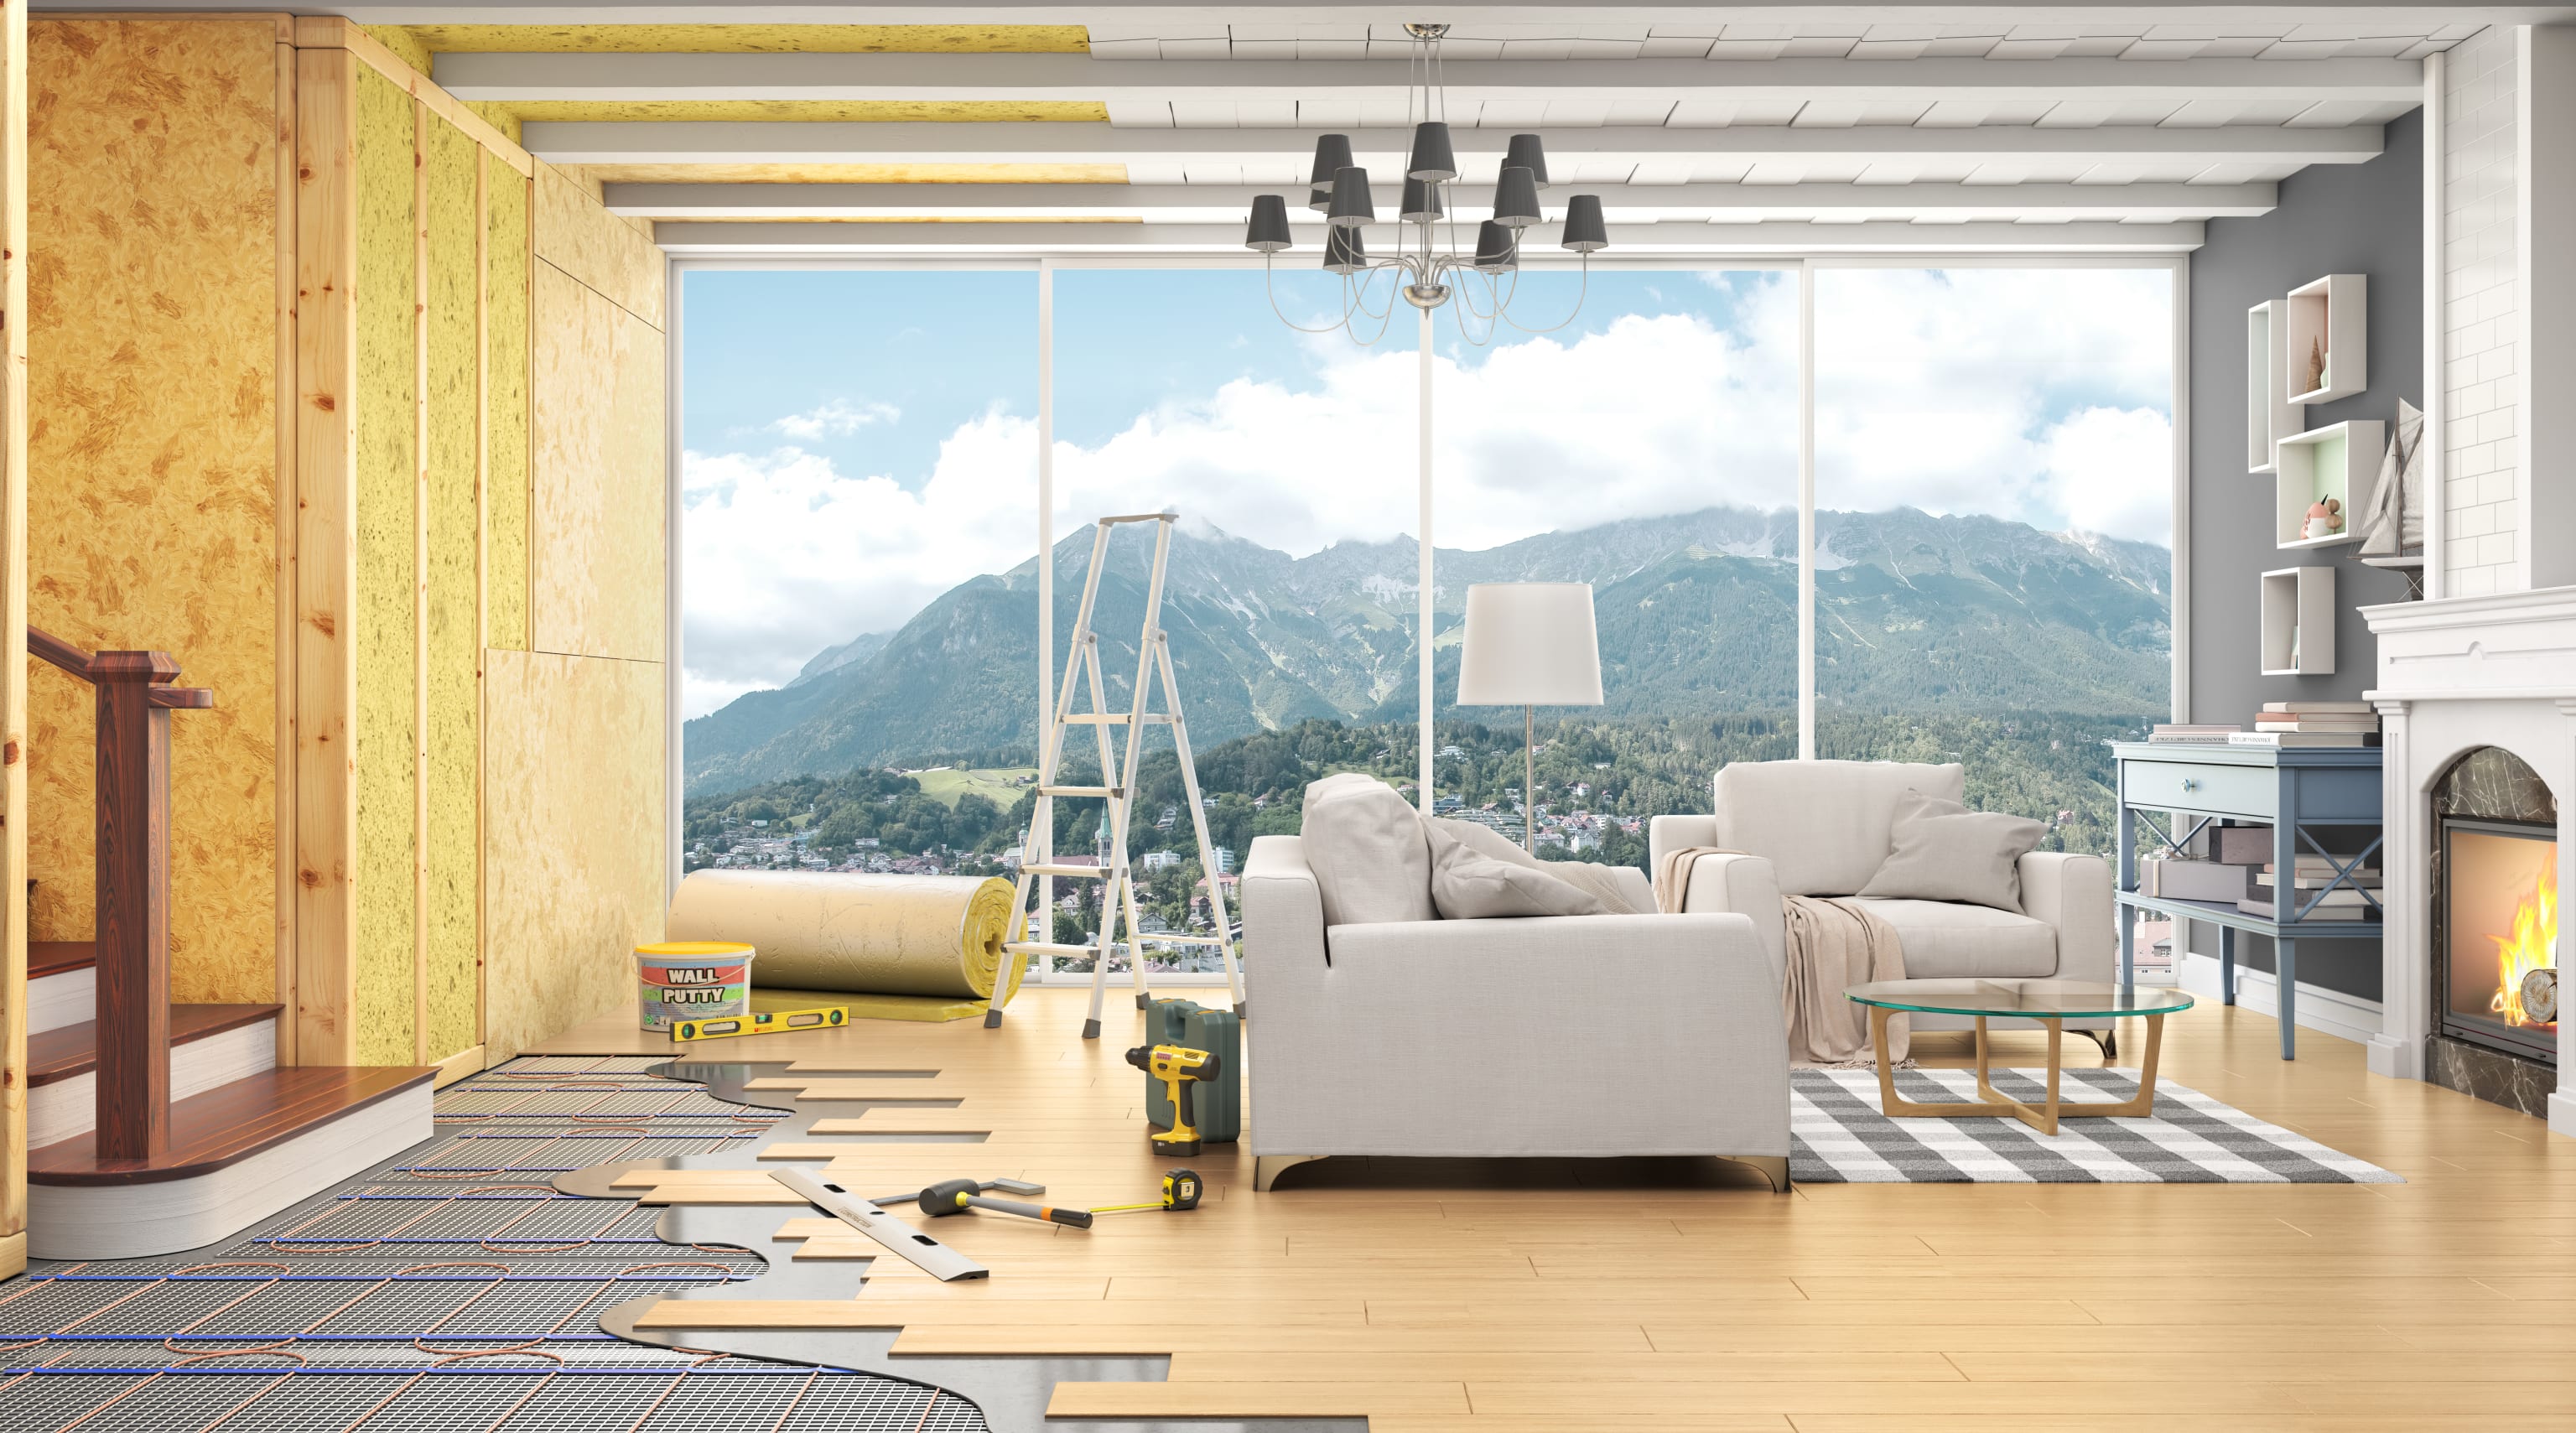 Photograph: 3d render of living room in construction process with layered scheme of walls and floor 3d illustration